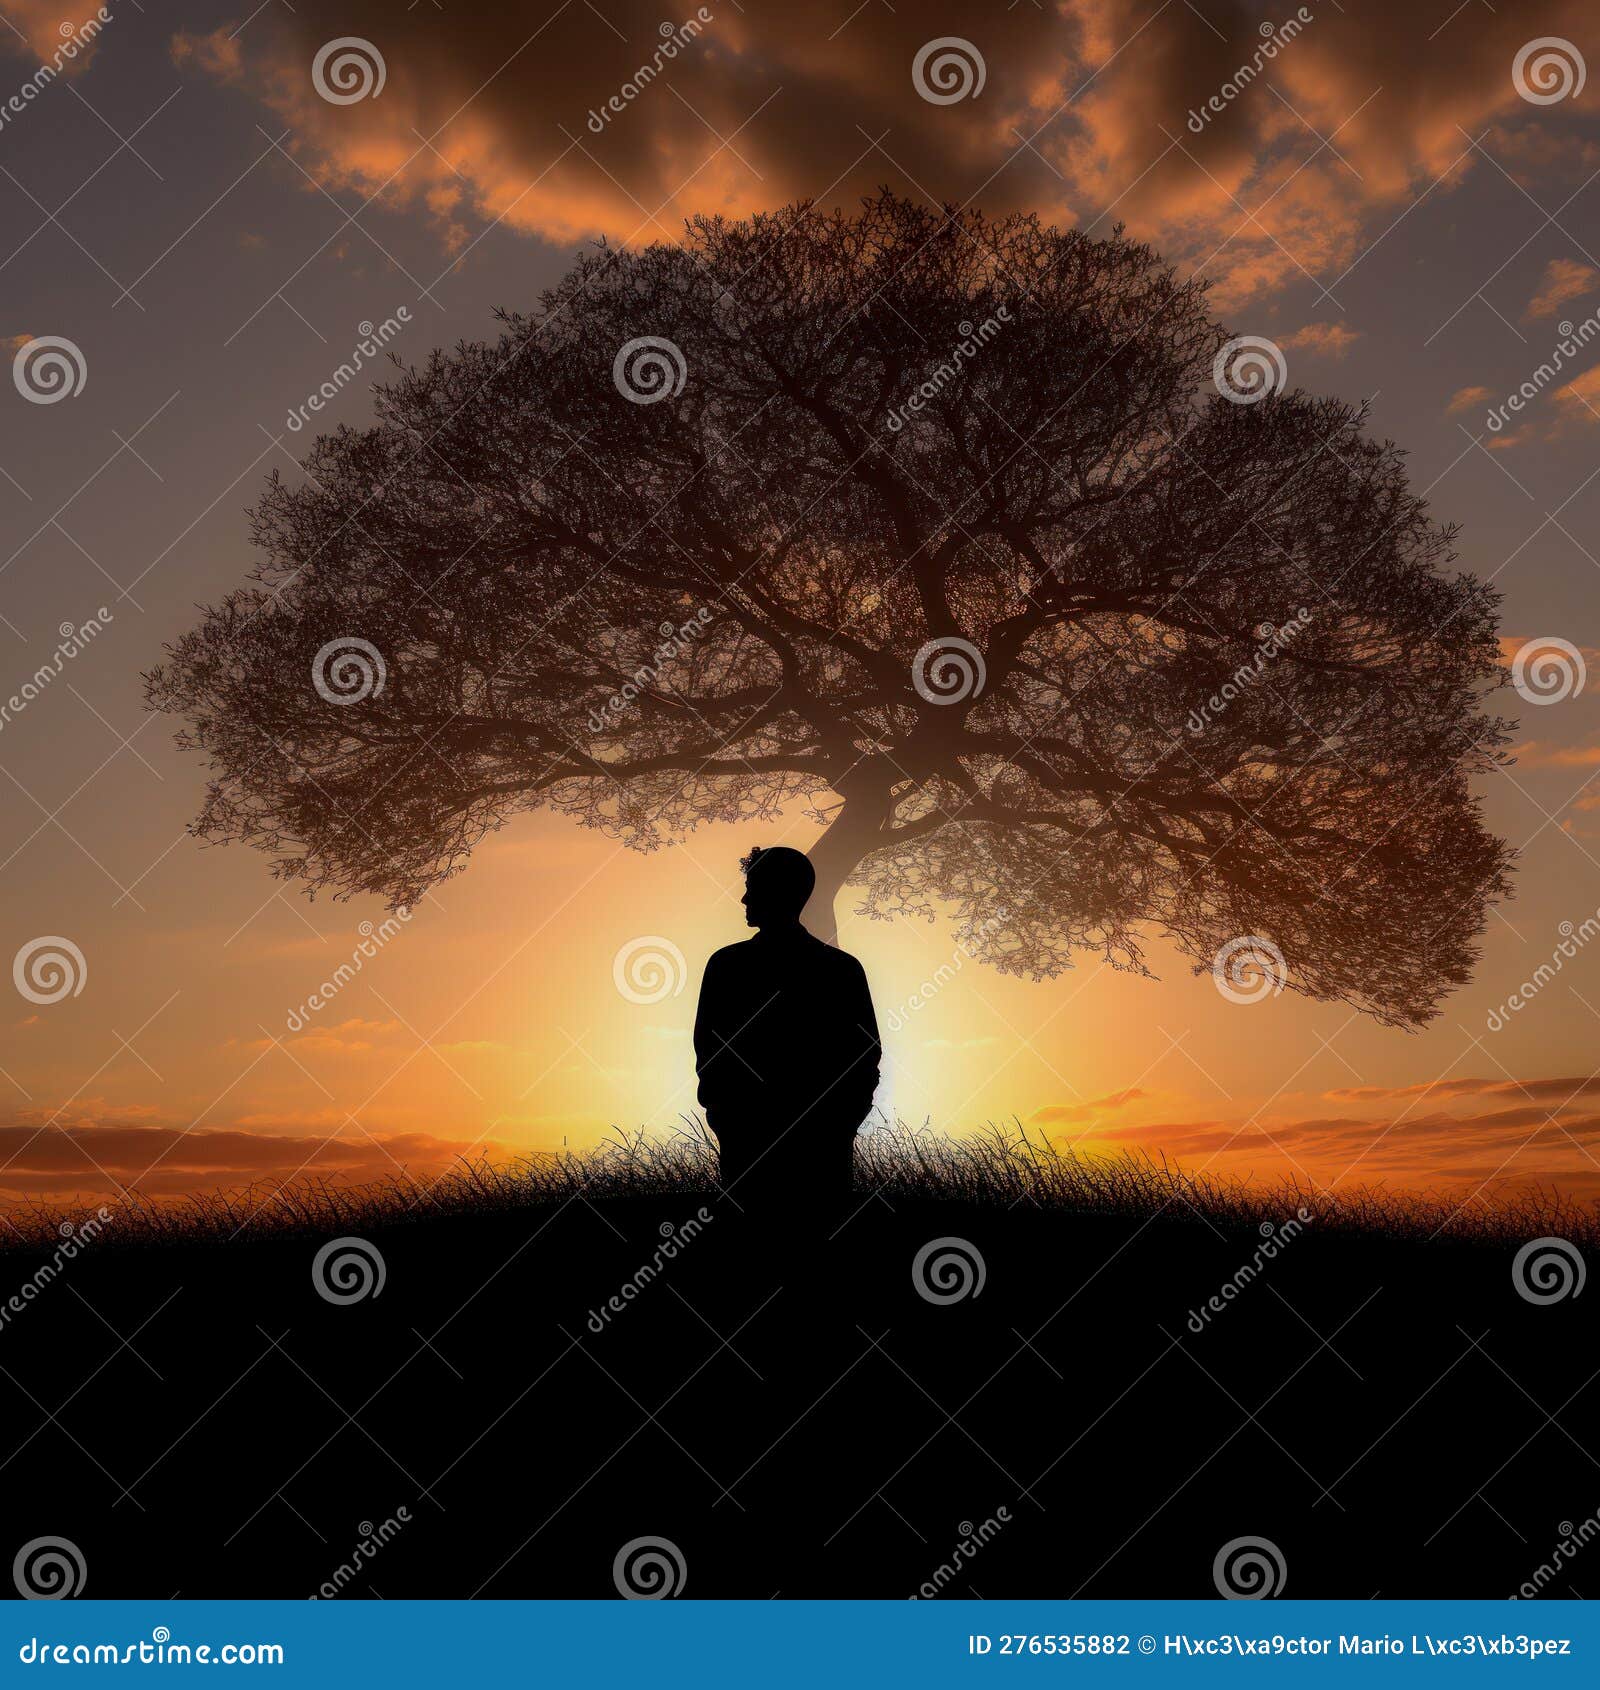 silhouette of a person next to a tree